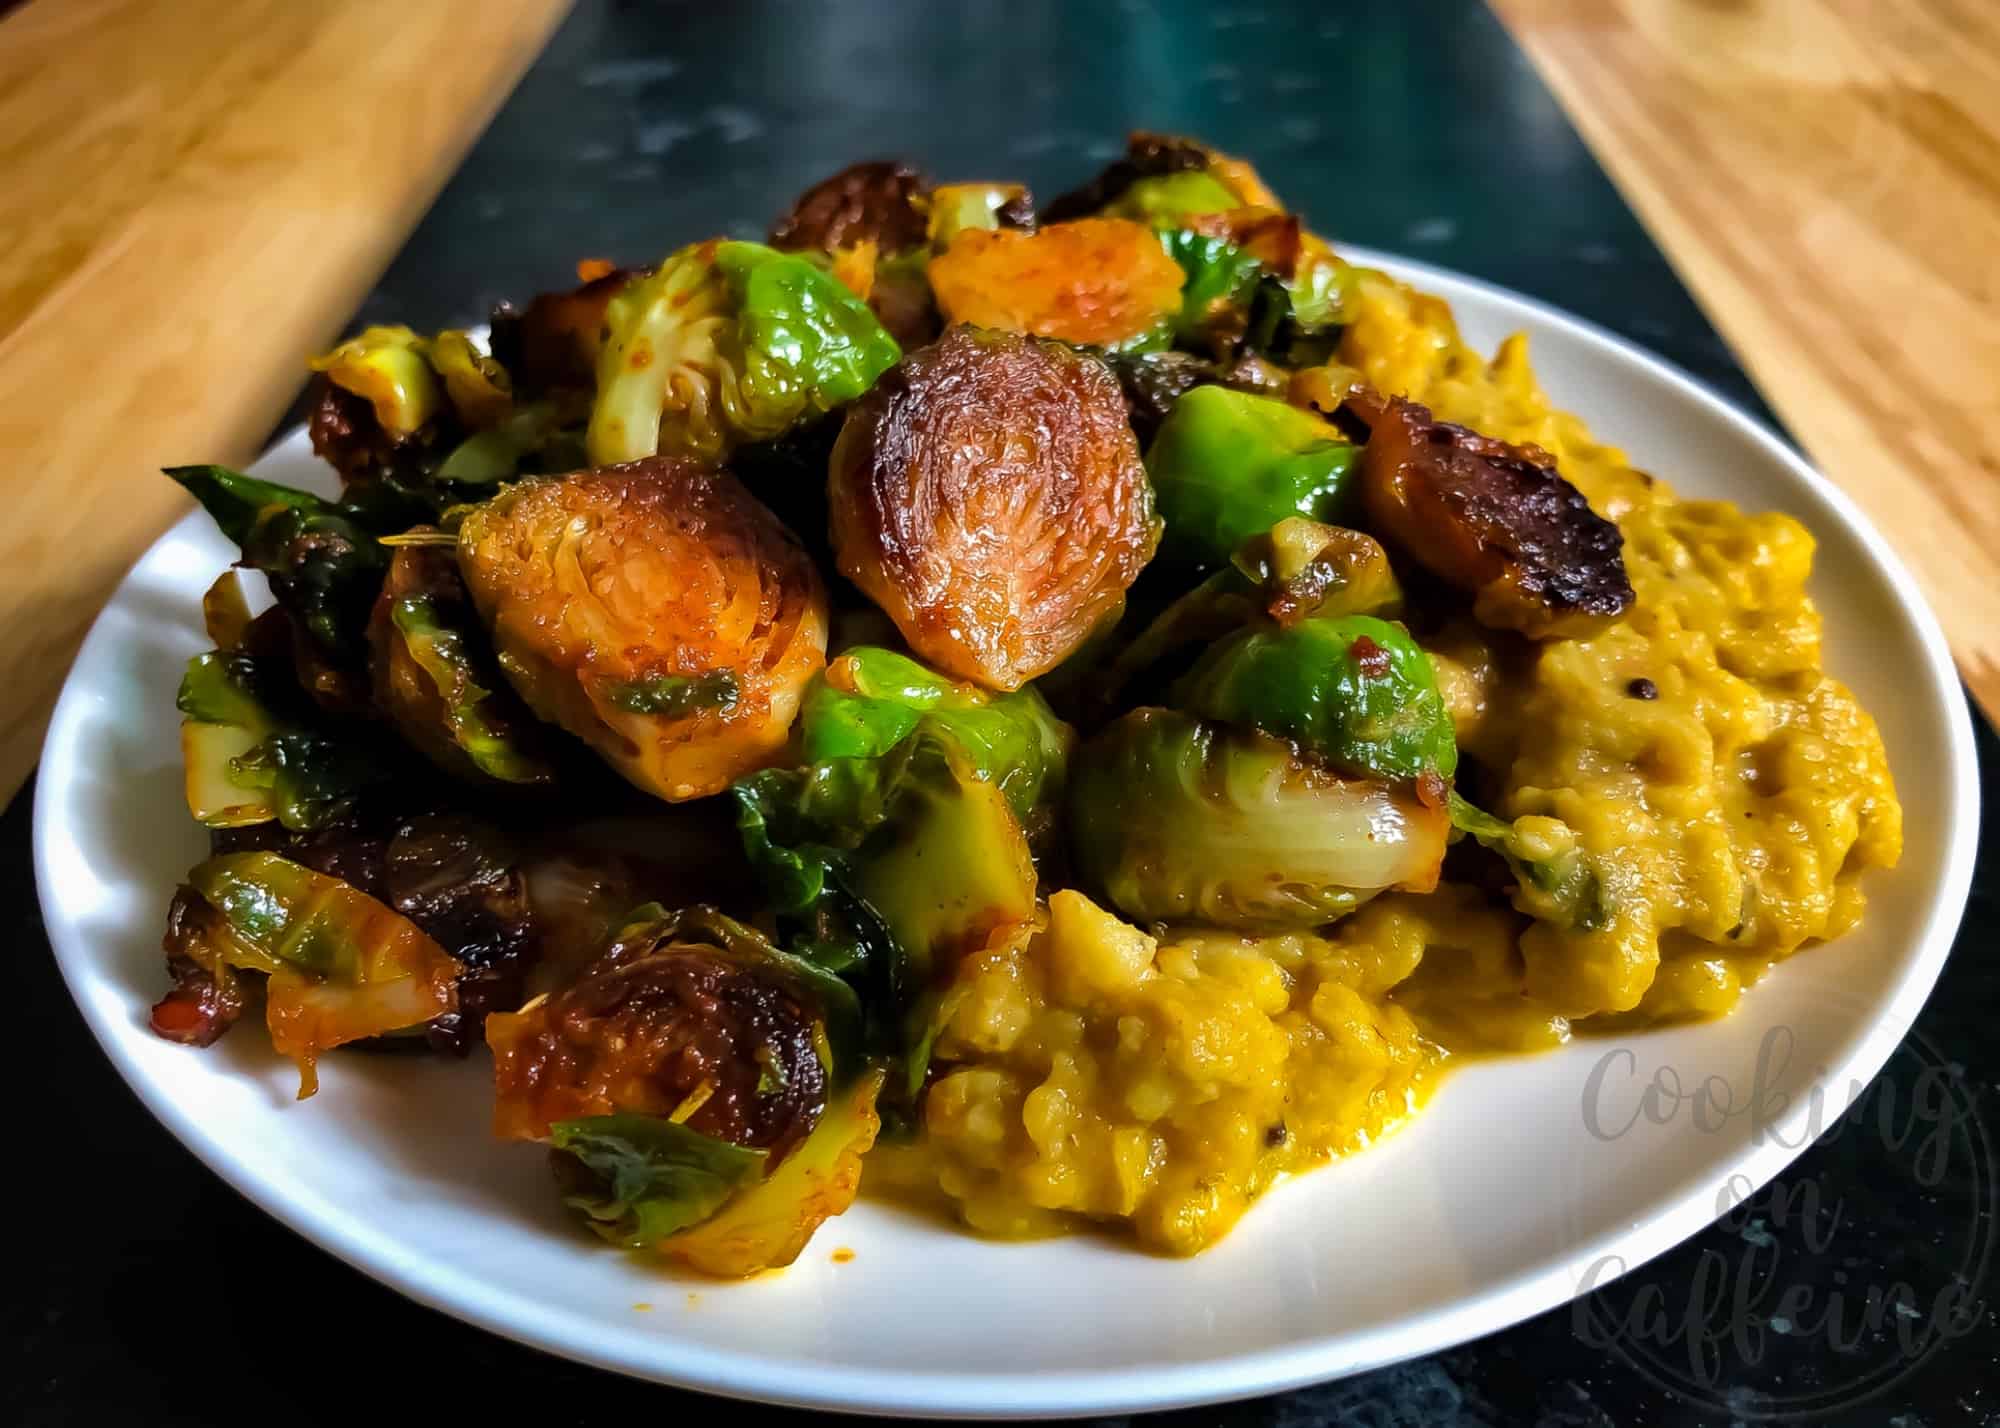 Side shot of seared Brussels sprouts coated in red chili paste and served on top of yellow dahl curry.